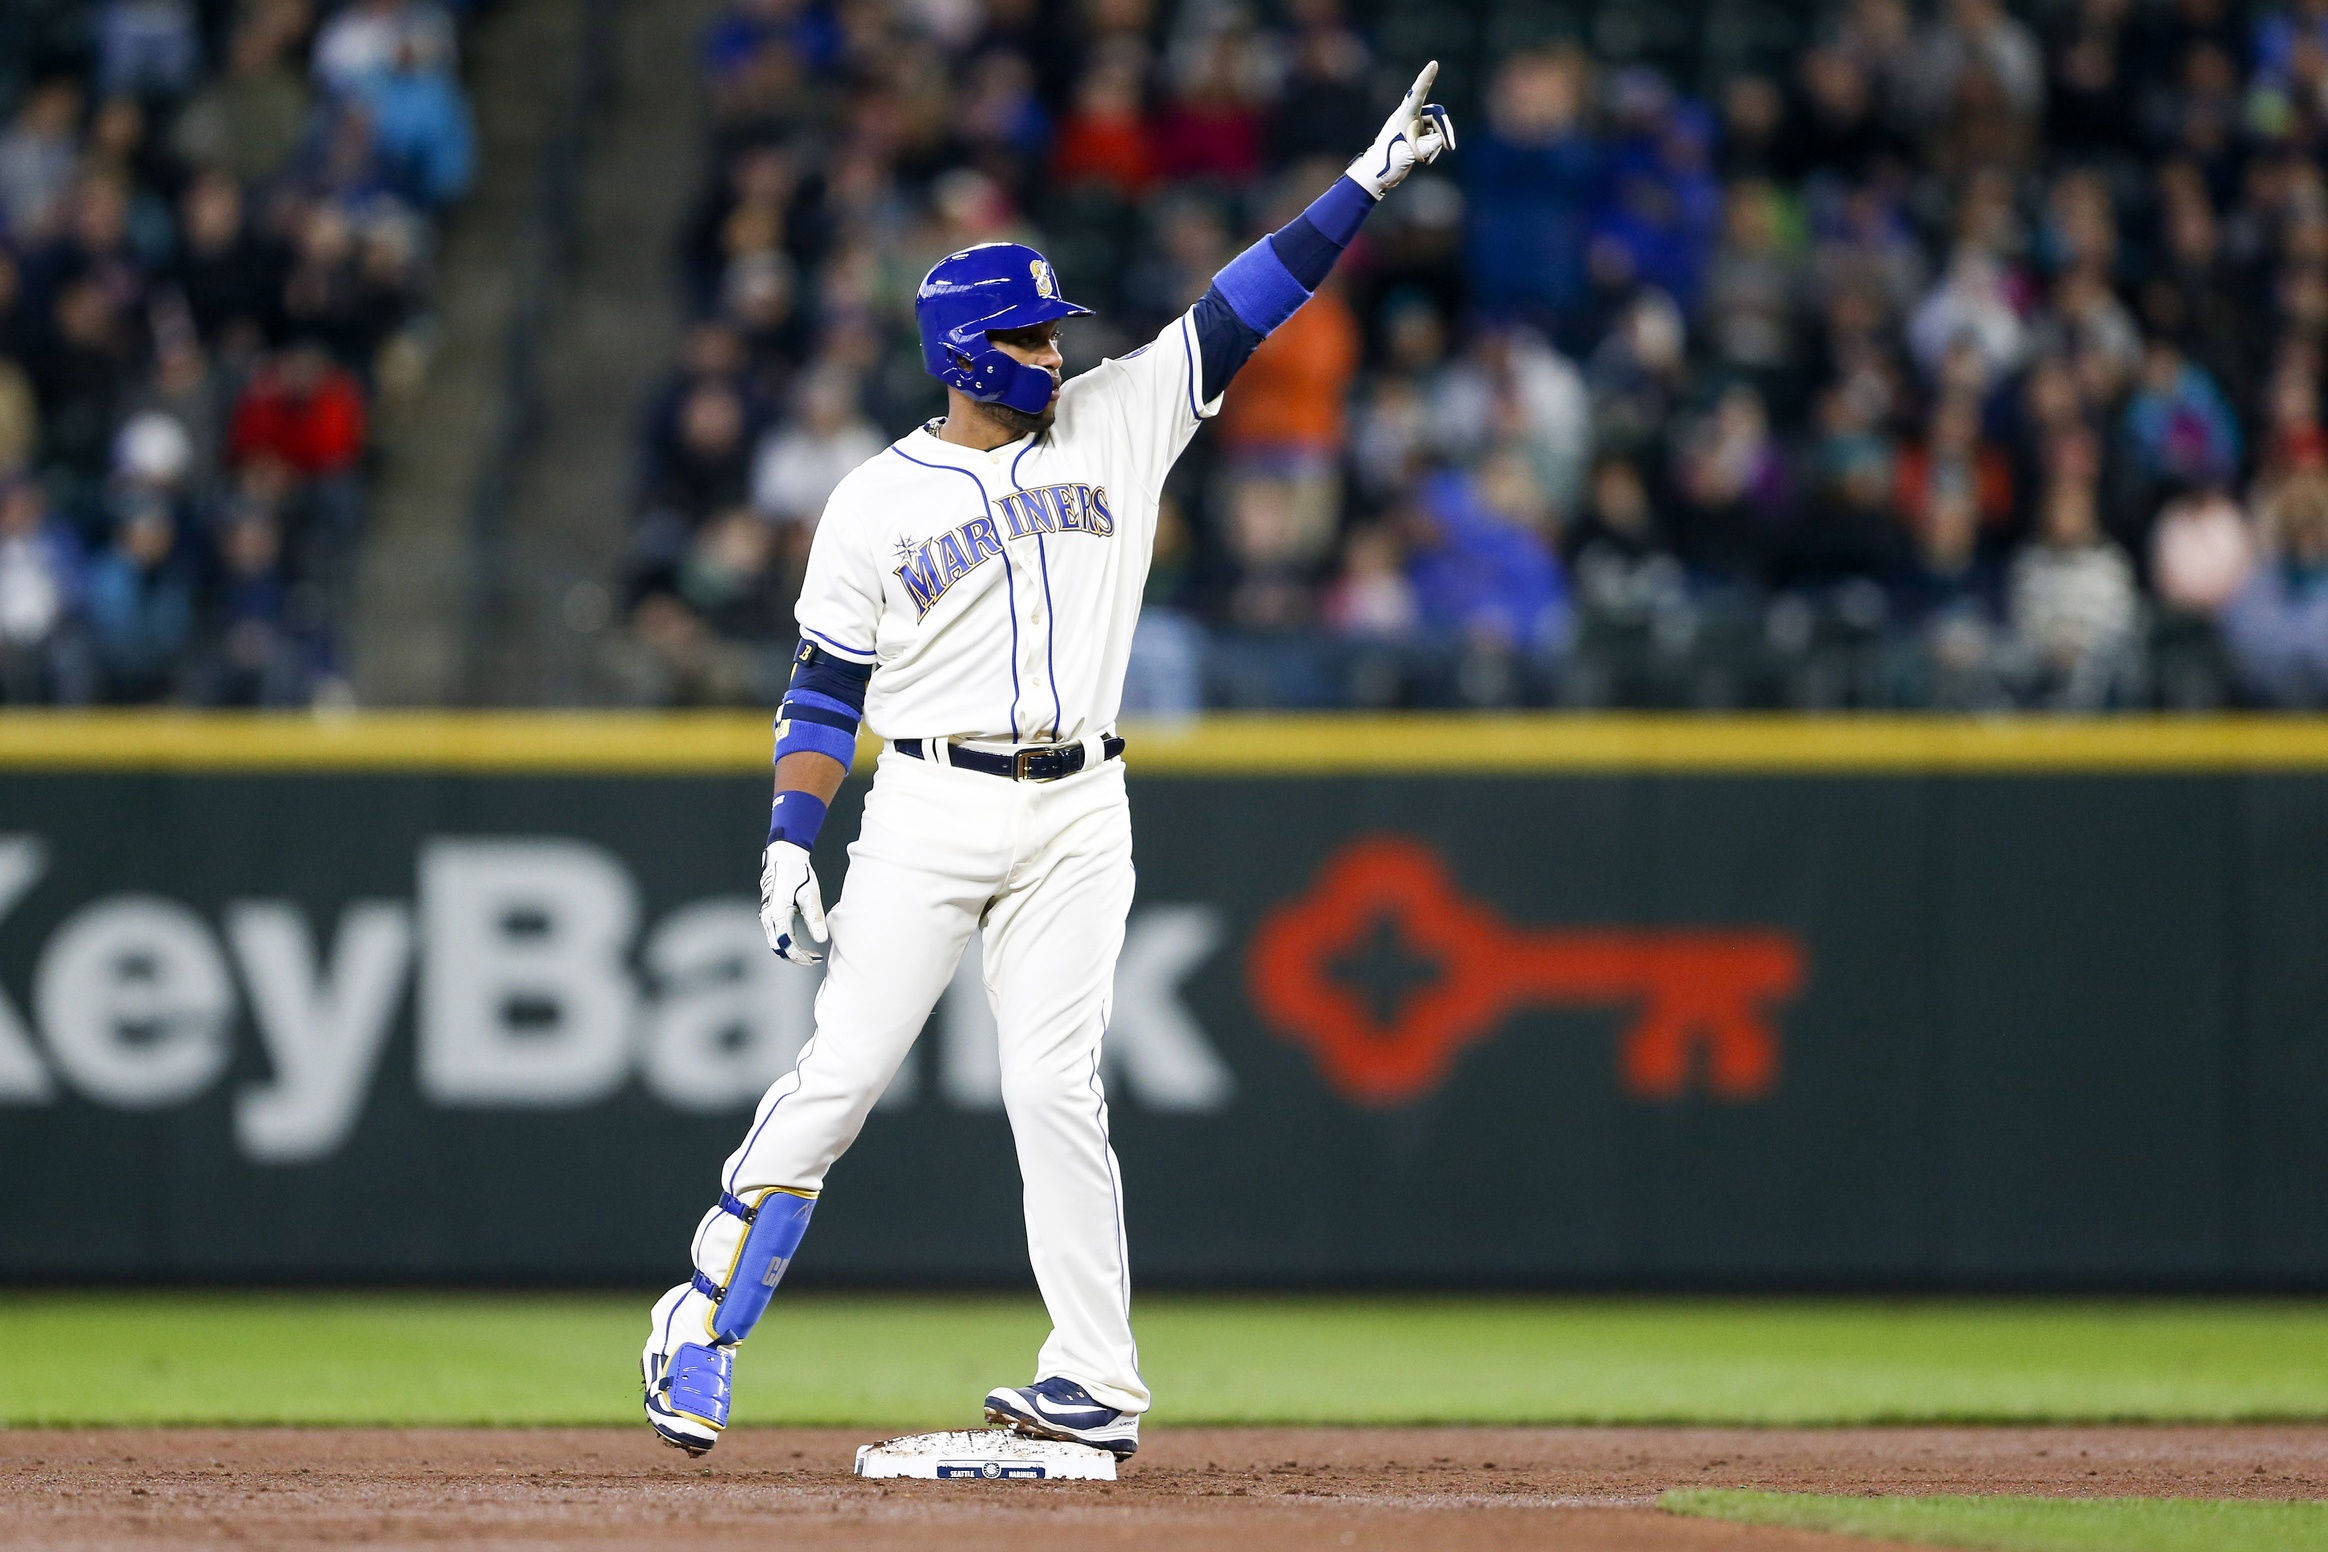 Apr 1, 2018; Seattle, WA, USA; Seattle Mariners second baseman Robinson Cano (22) reacts after hitting a double against the Cleveland Indians during the first inning at Safeco Field. Mandatory Credit: Joe Nicholson-USA TODAY Sports